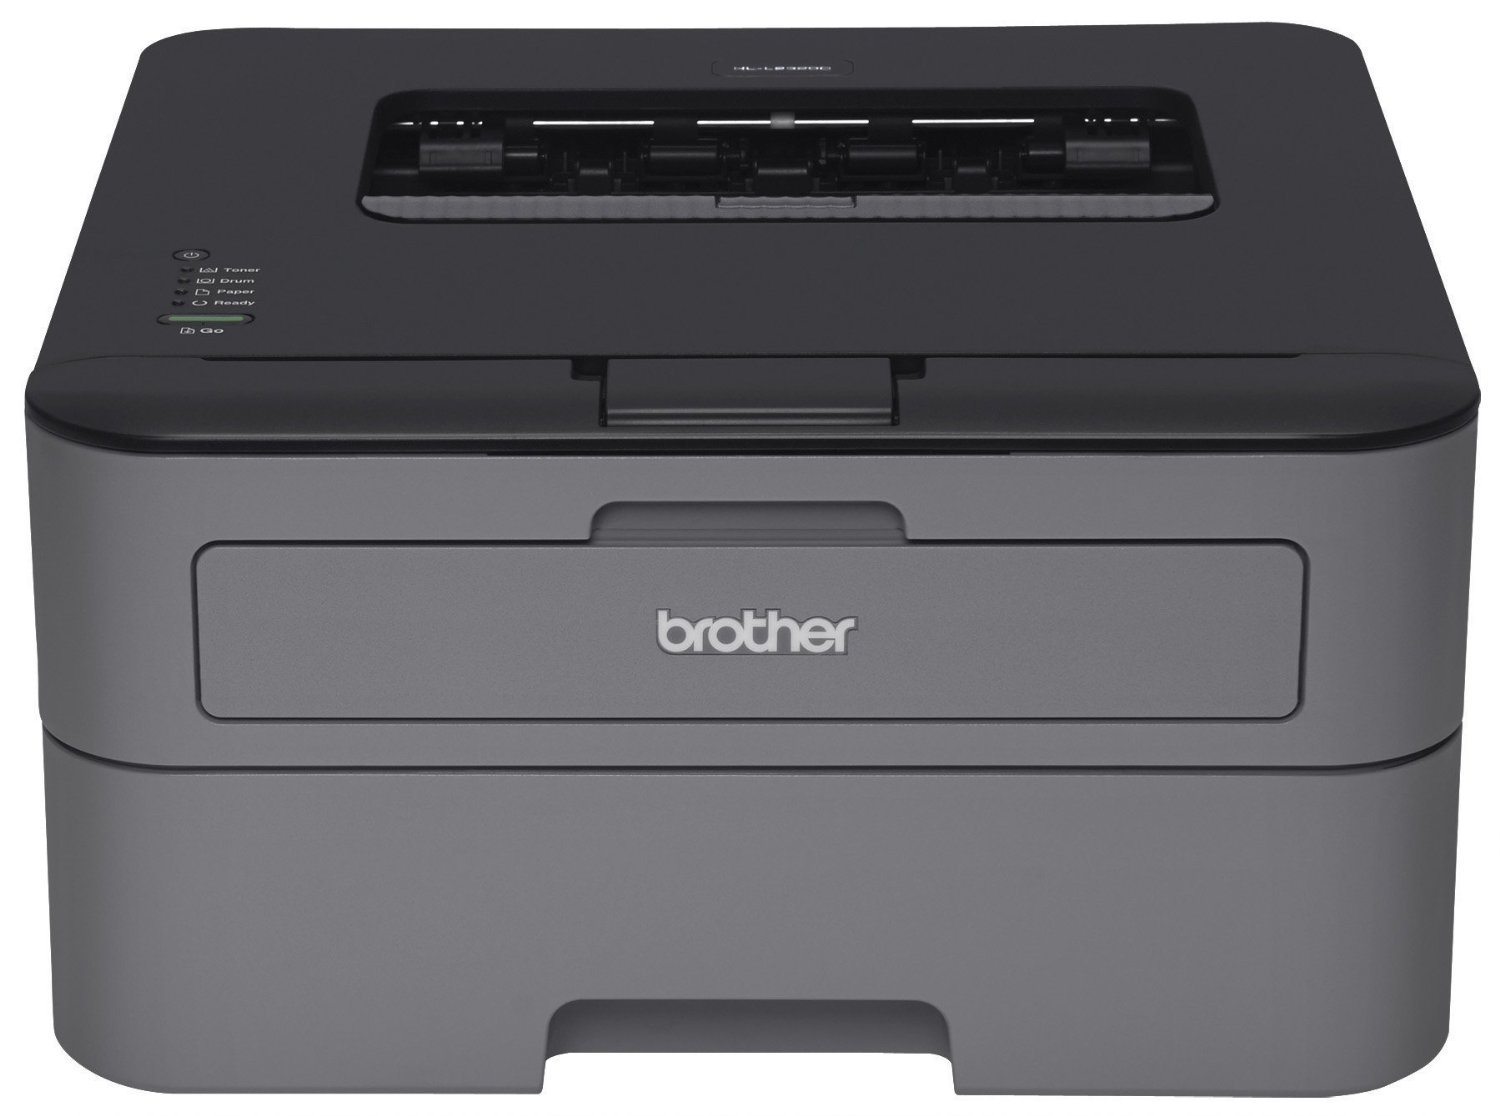 Toner-Spot: Brother DR-630 Drum Recognition Issue –Reset ...